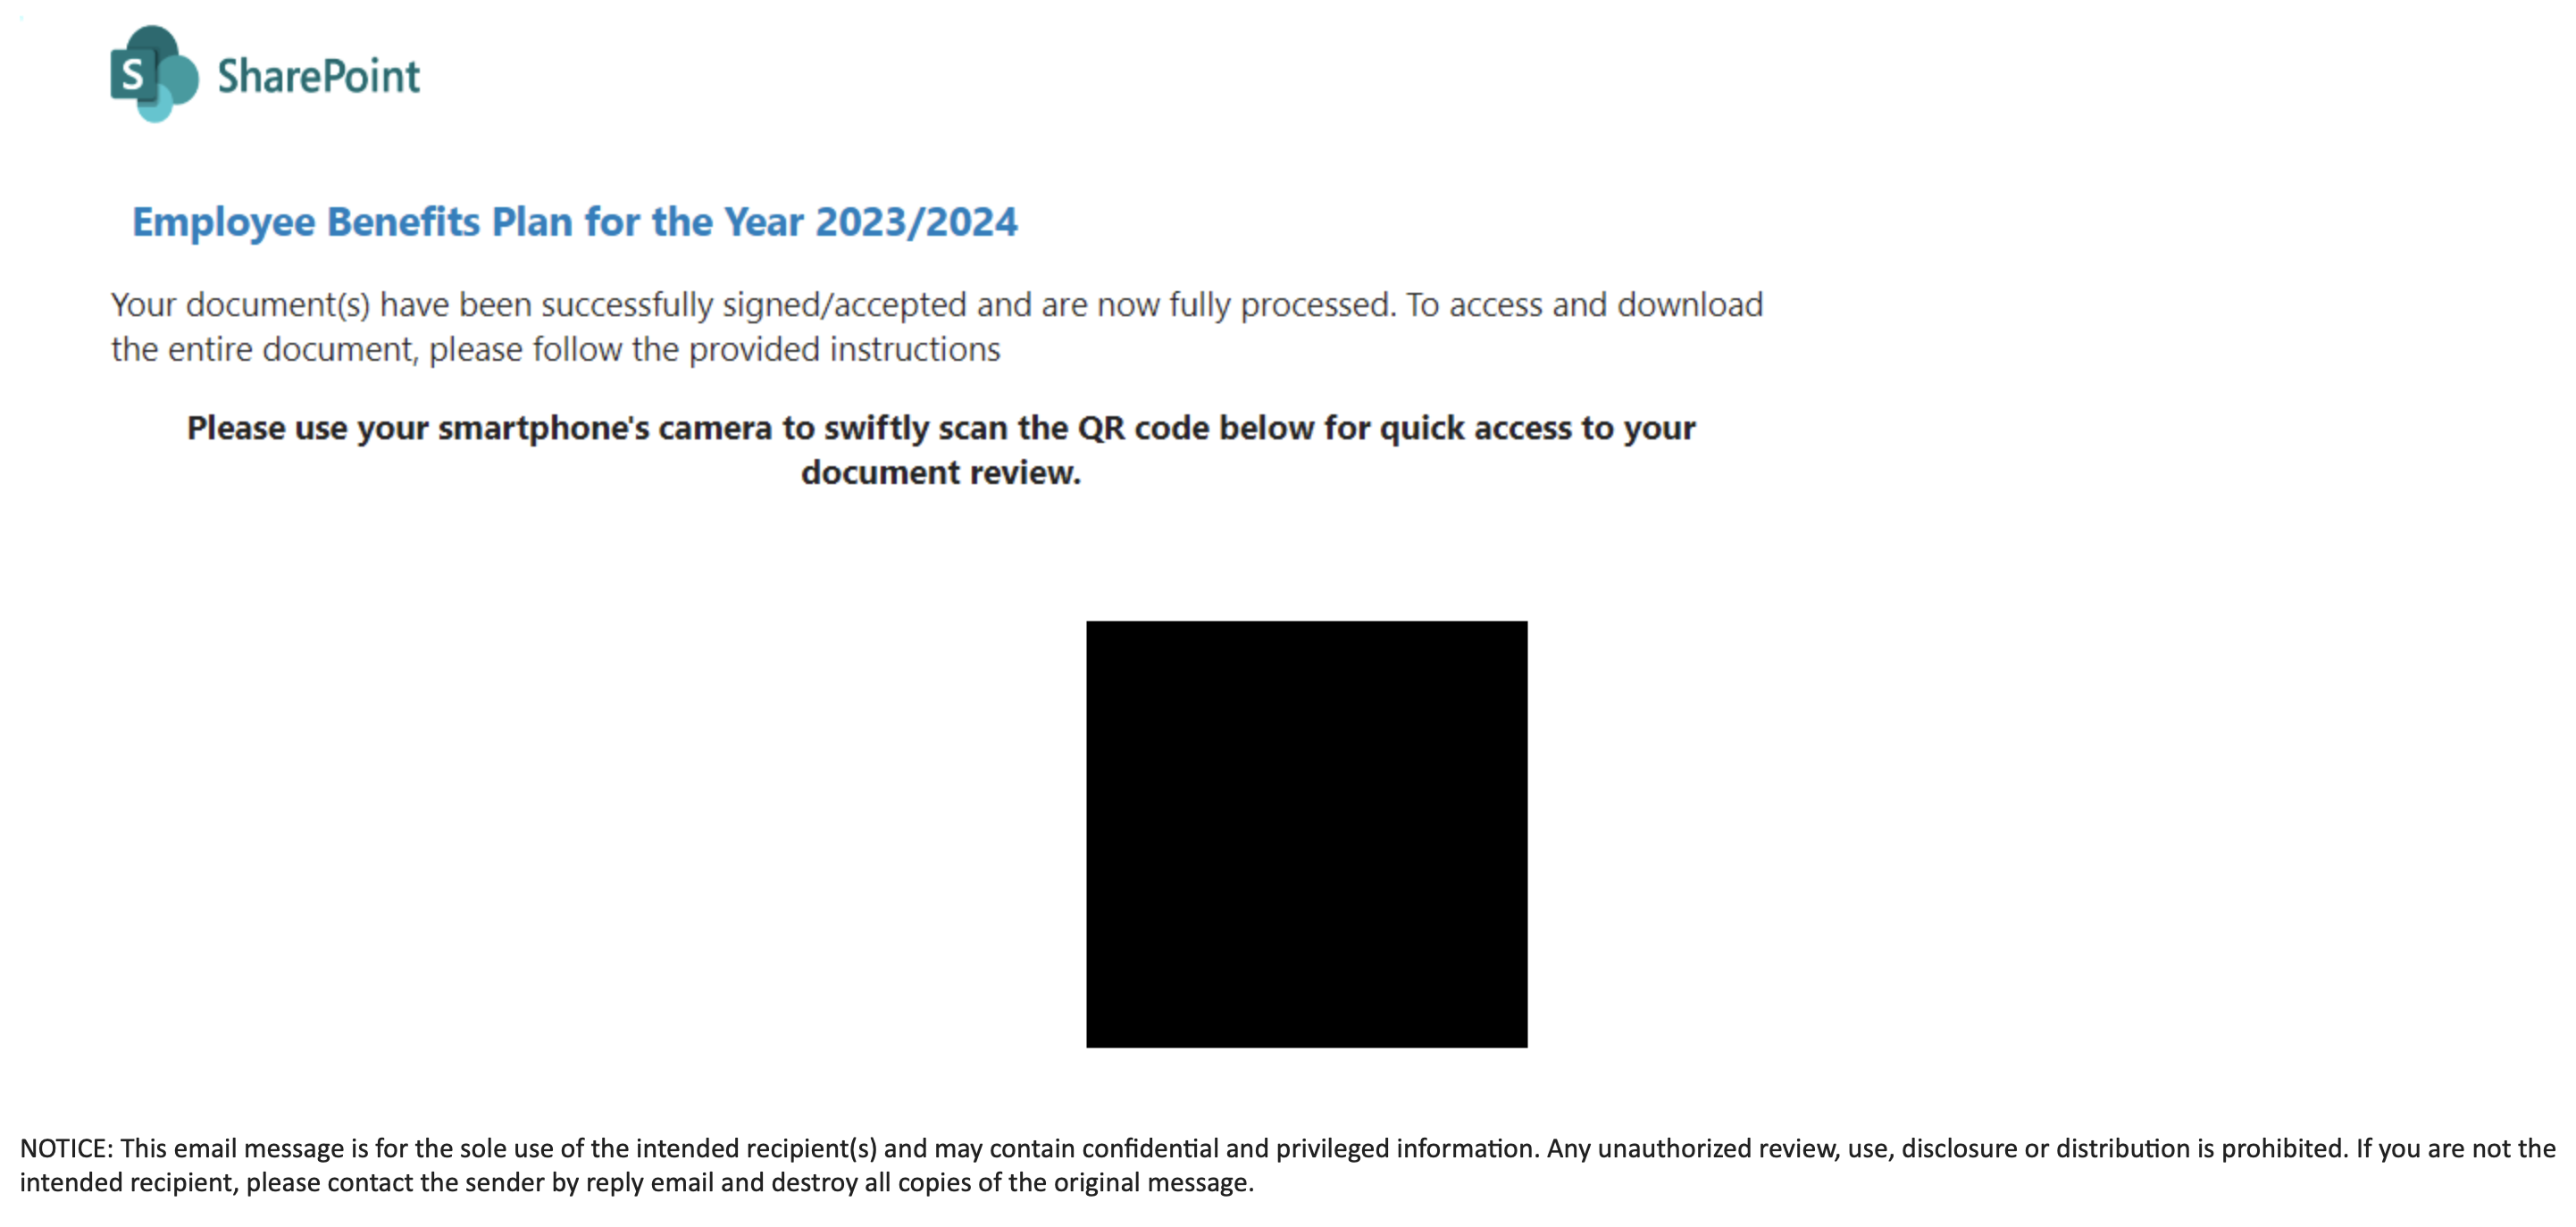 A fake SharePoint-branded notification with the heading "Employee Benefits Plan for the Year 2023/2024" asking the recipient to scan a QR code to view documents.